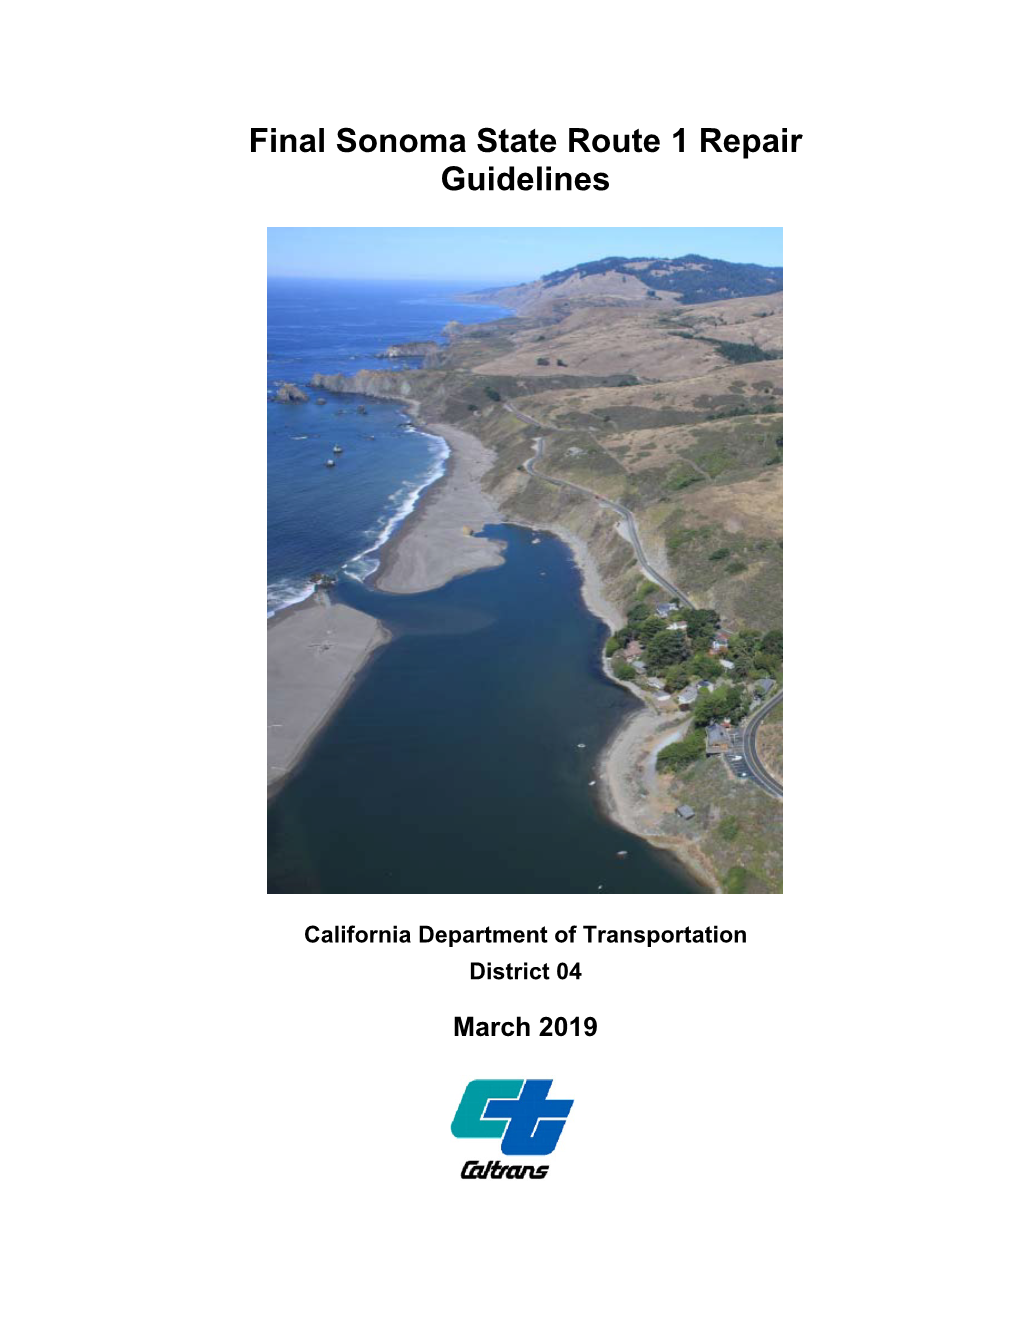 Sonoma State Route 1 Repair Guidelines